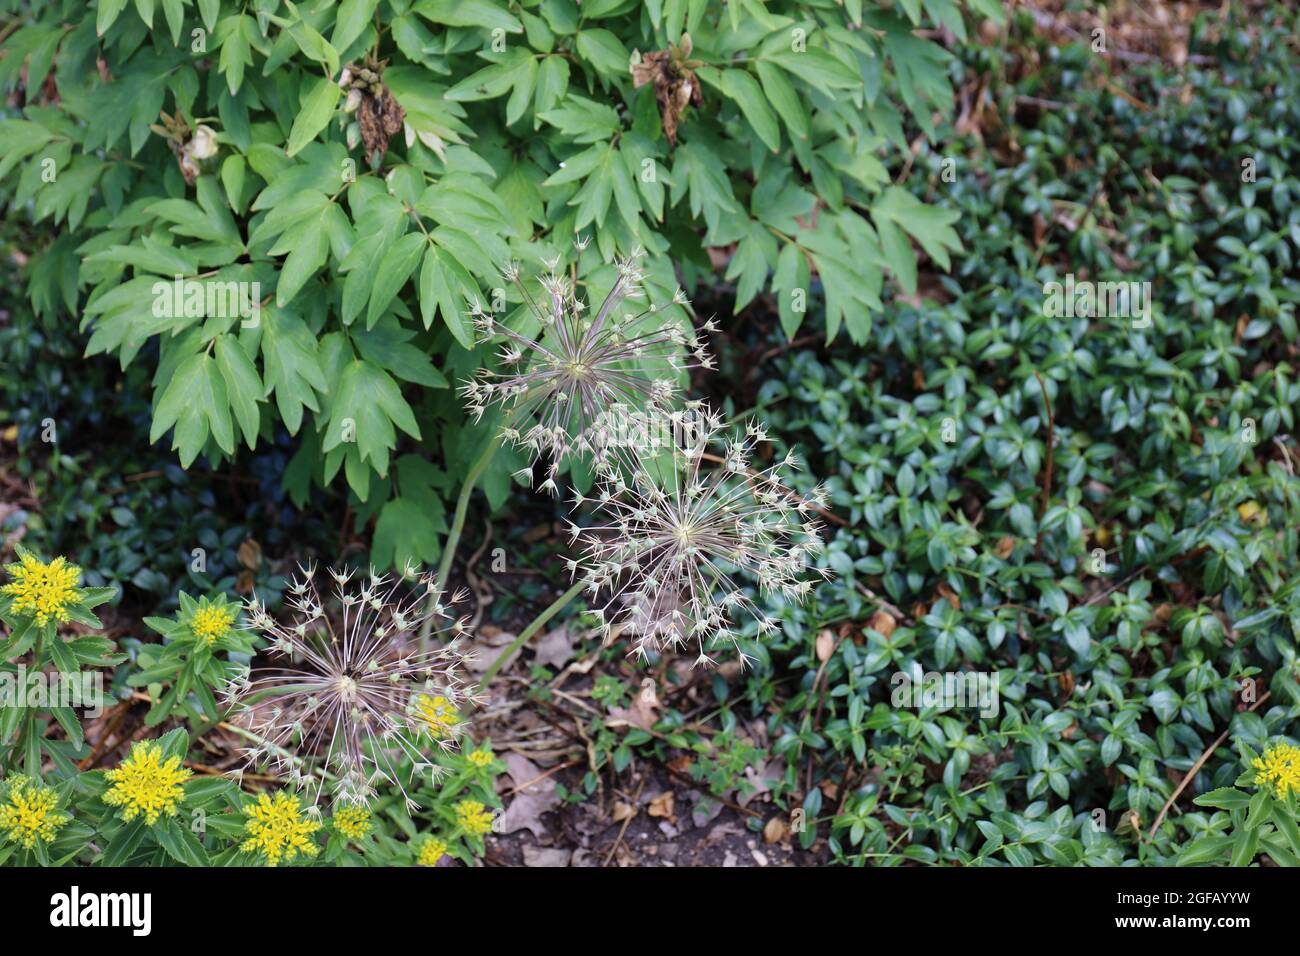 Allium seed heads in front of a shrub in a garden in Hales Corners, Wisconsin in the summer Stock Photo